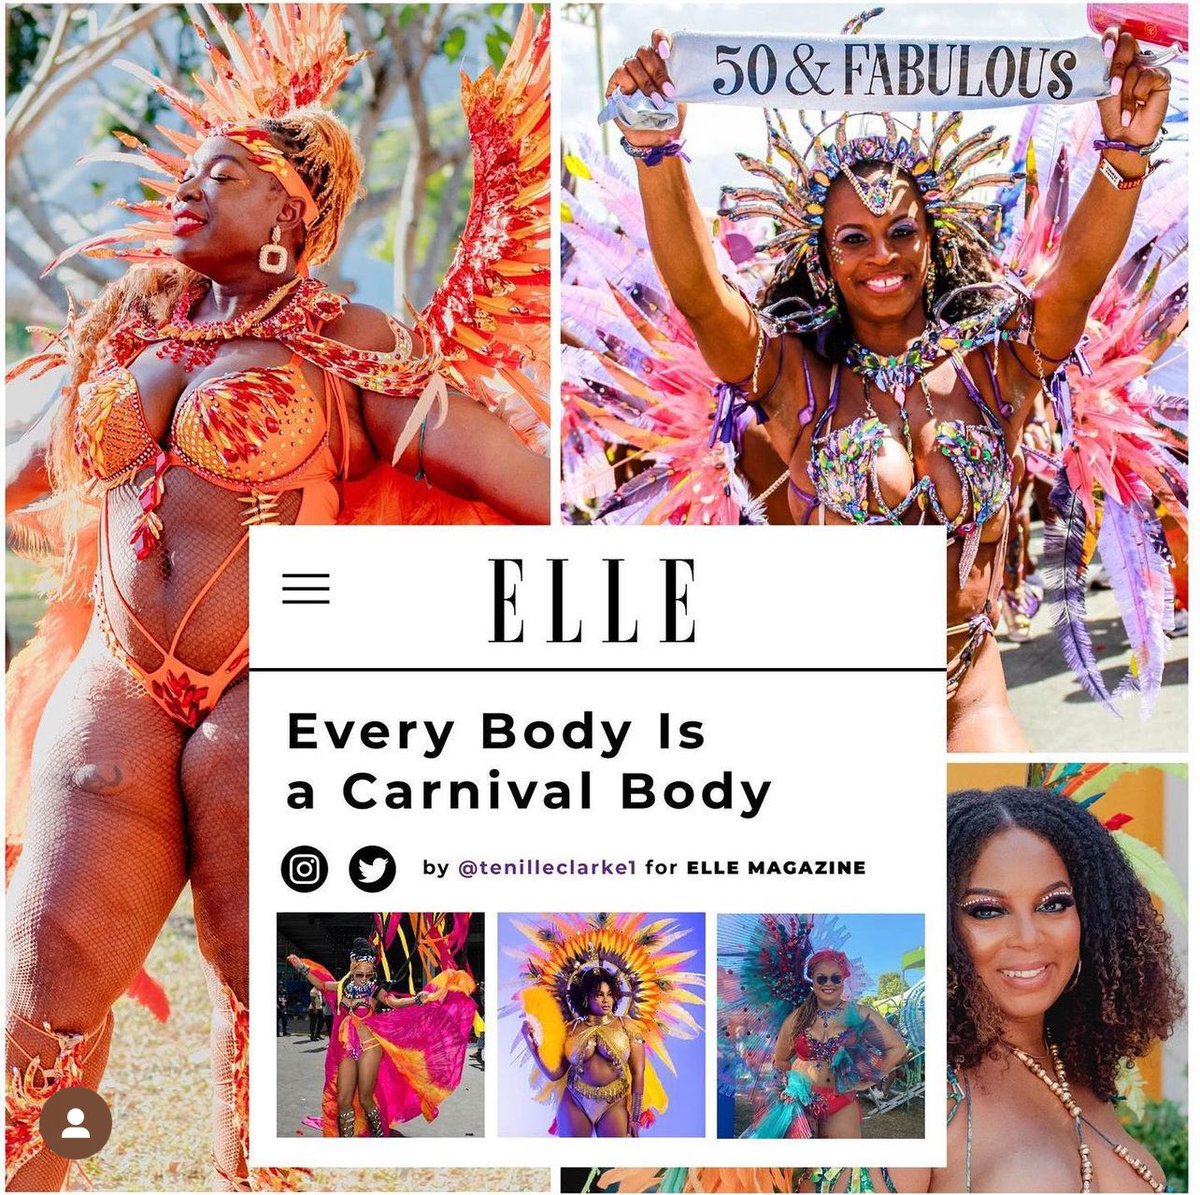 Exactly one year ago this month, I wrote “Every Body Is A Carnival Body” for @ELLEmagazine. It went on to be one of the most read stories for the magazine in 2023, amassing MILLIONS of views globally. I’m posting this today because as a Caribbean community, it’s important to…